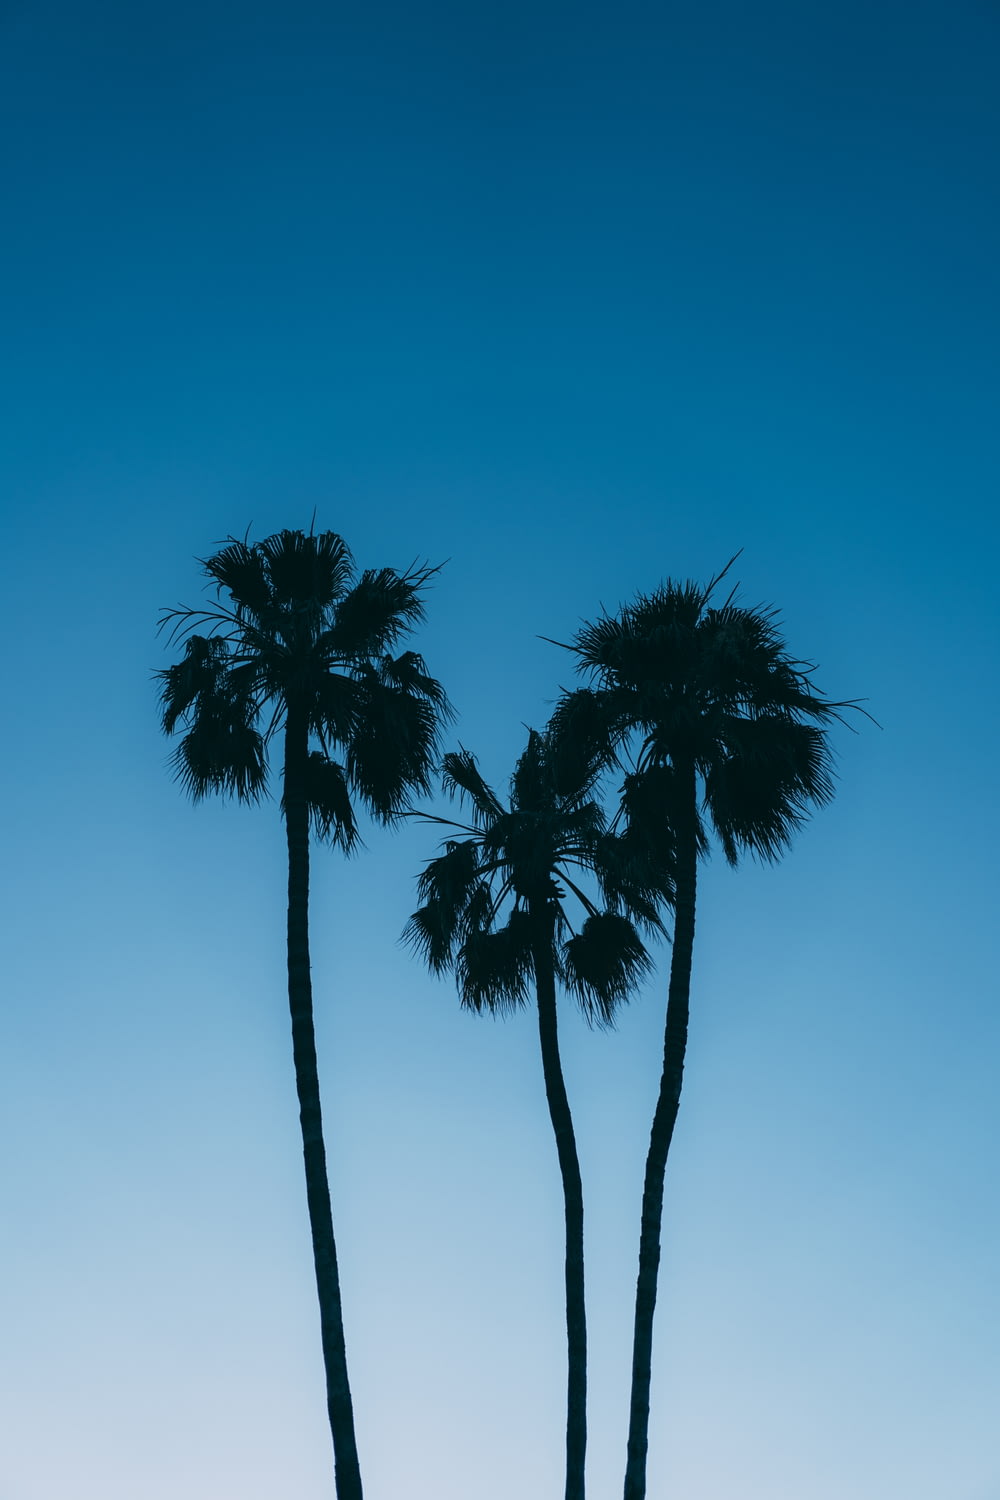 two palm trees are silhouetted against a blue sky